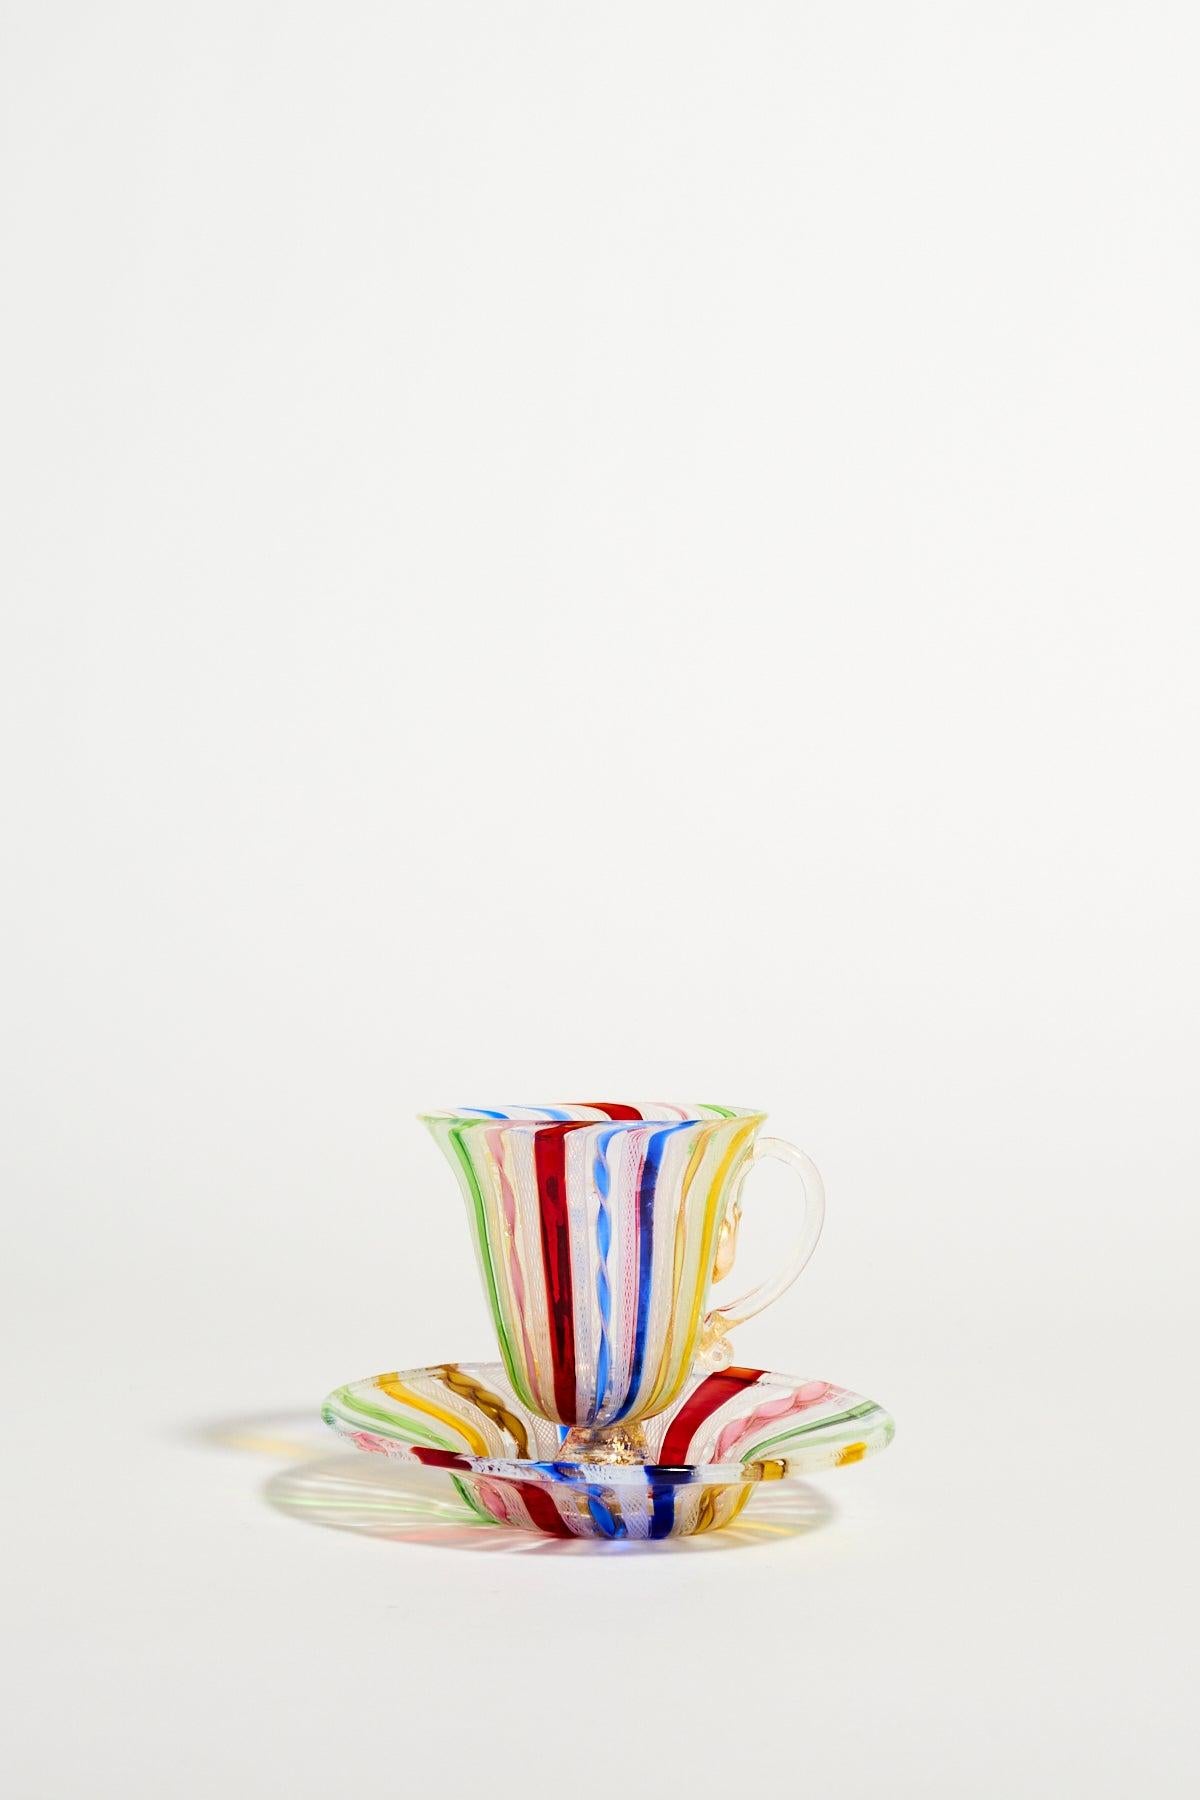 Elegant Venetian glass pedestal teacup and saucer decorated with multicoloured ribbons and white lattice and an ornate clear glass handle.
 